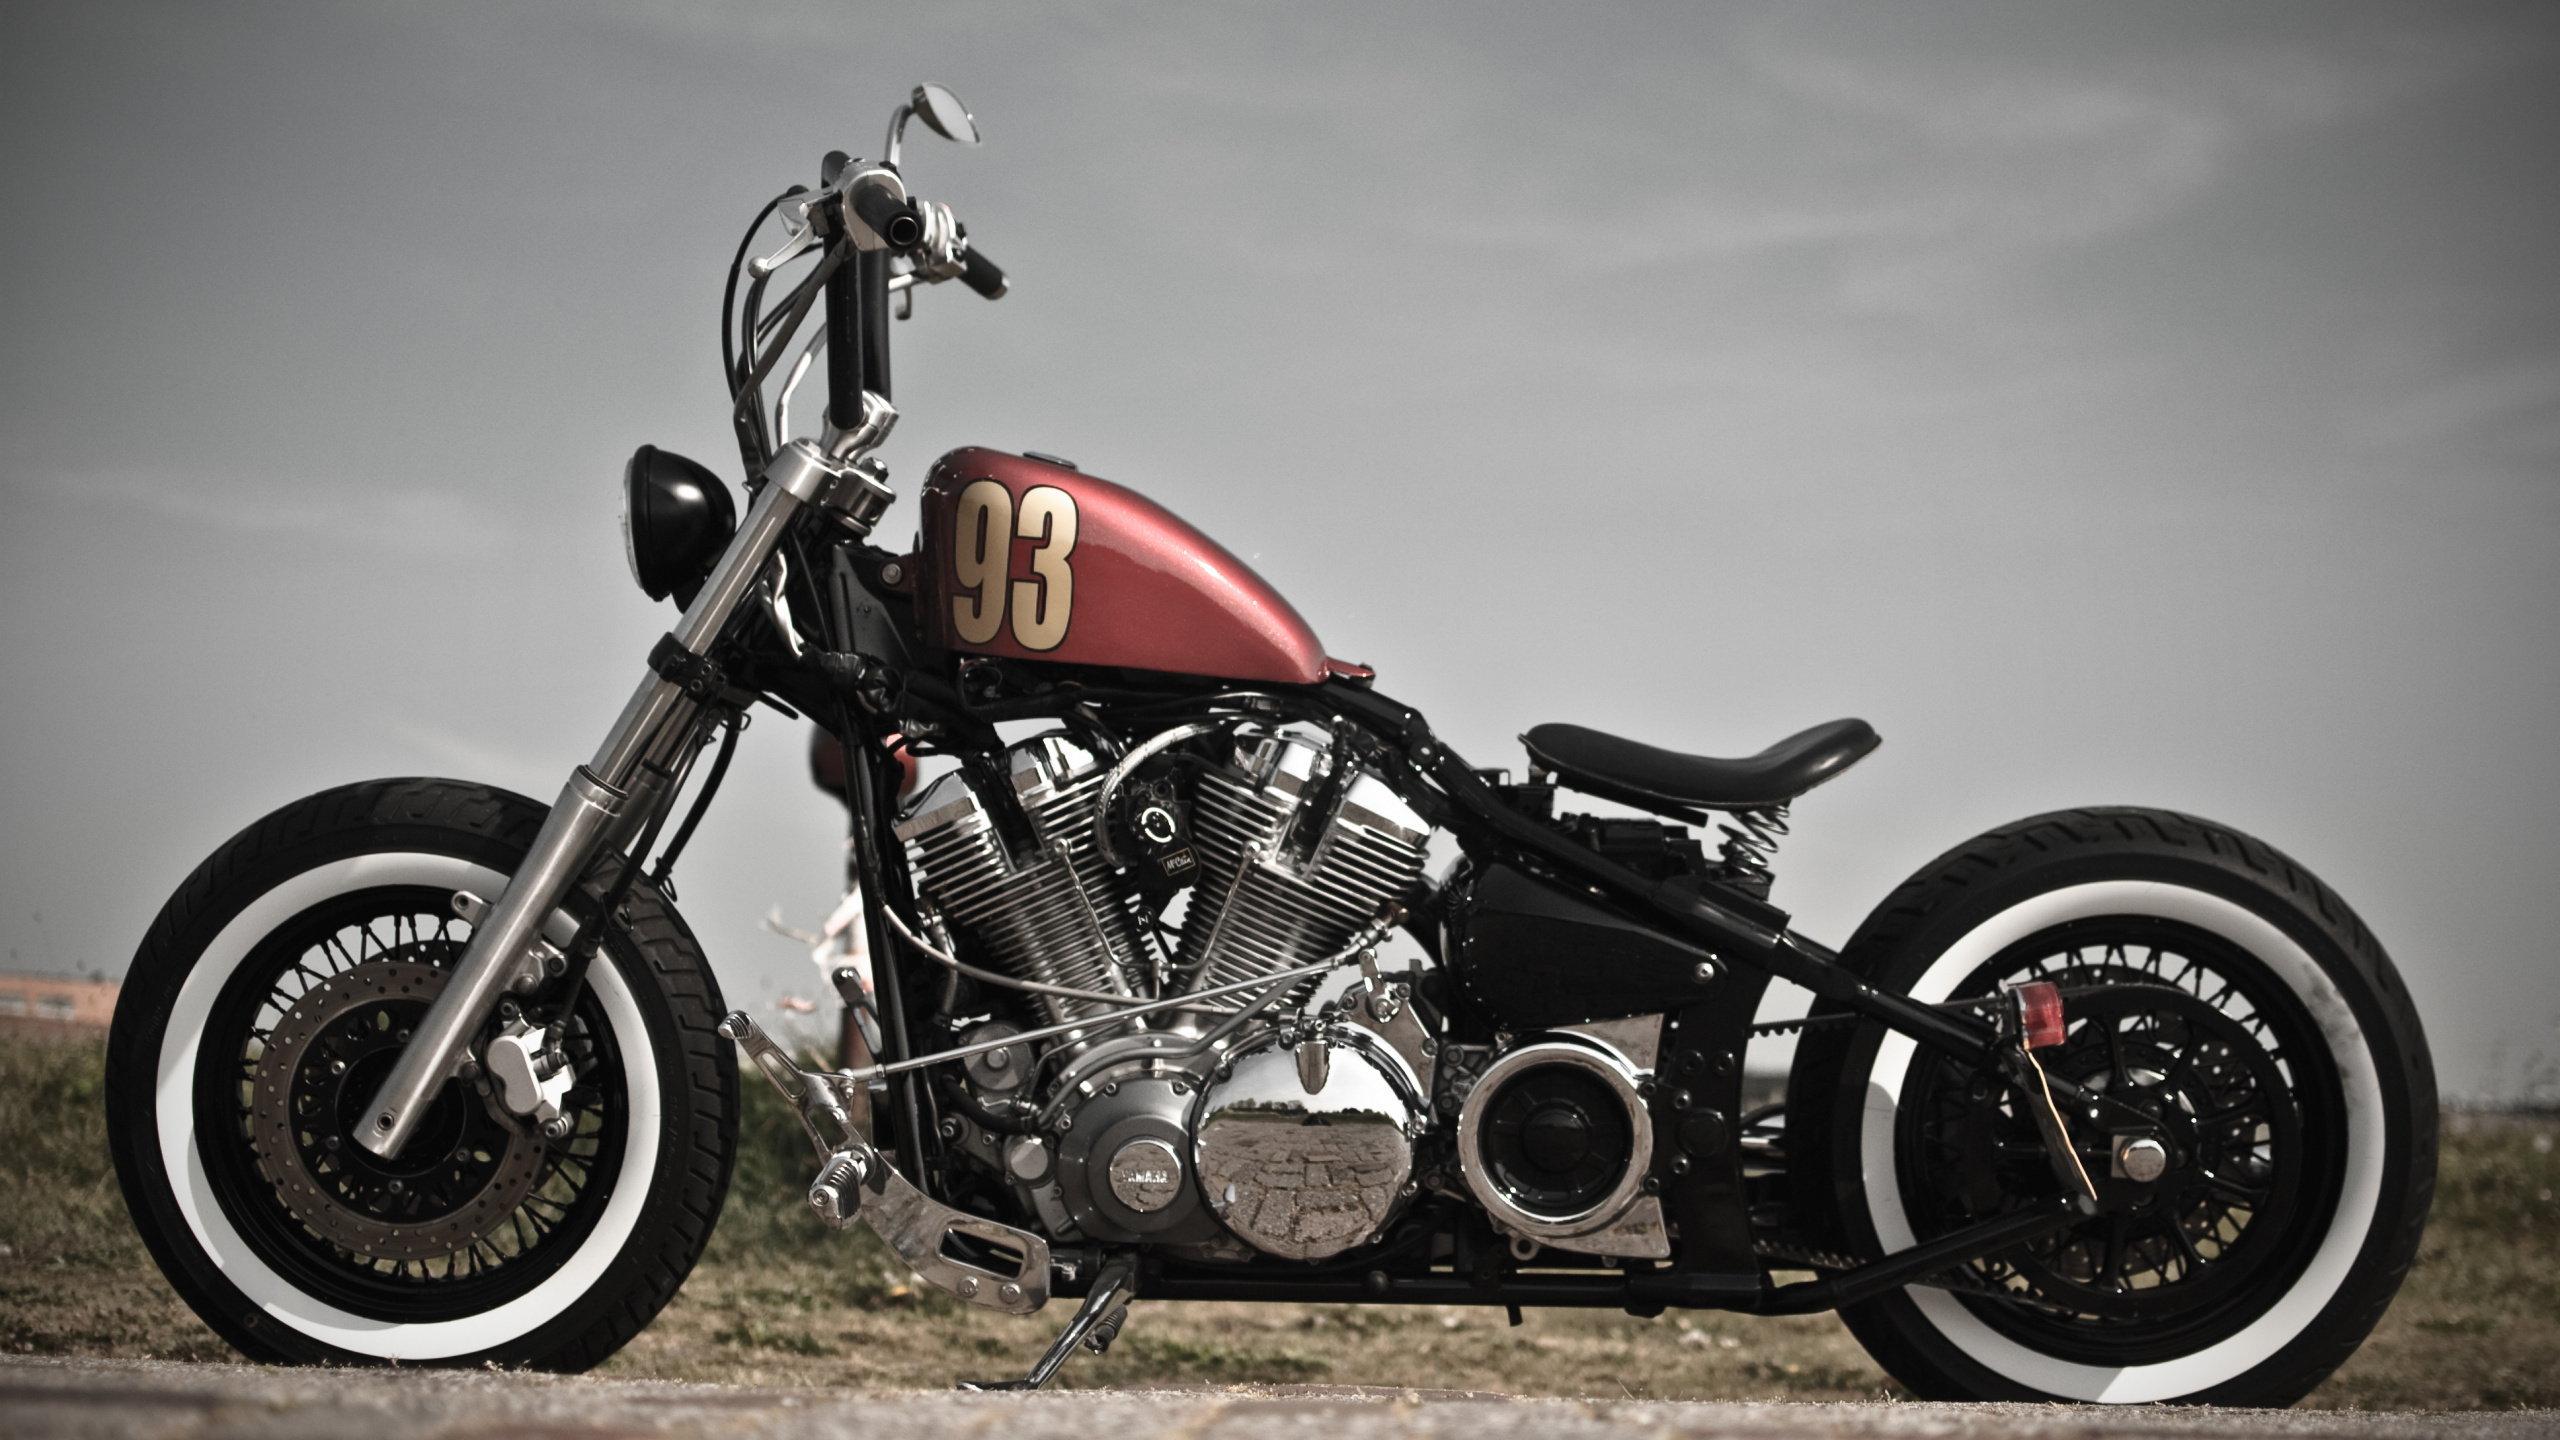 Red and Black Motorcycle on Brown Field. Wallpaper in 2560x1440 Resolution